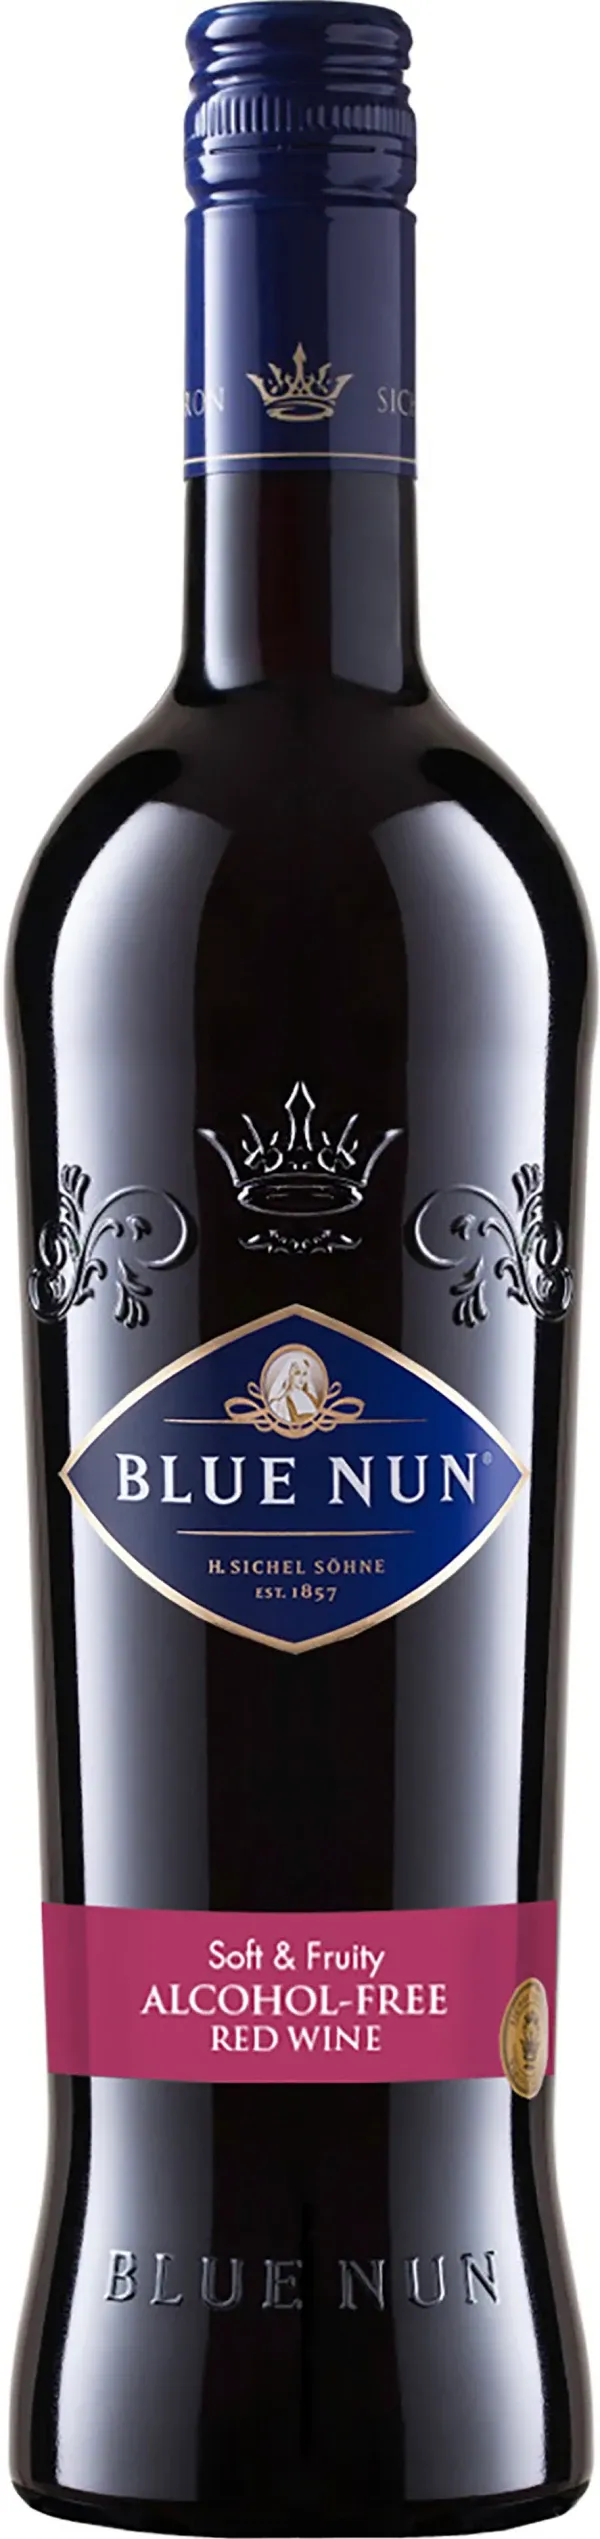 BLUE NUN RED ALCOHOL FREE   0,5%   75CL